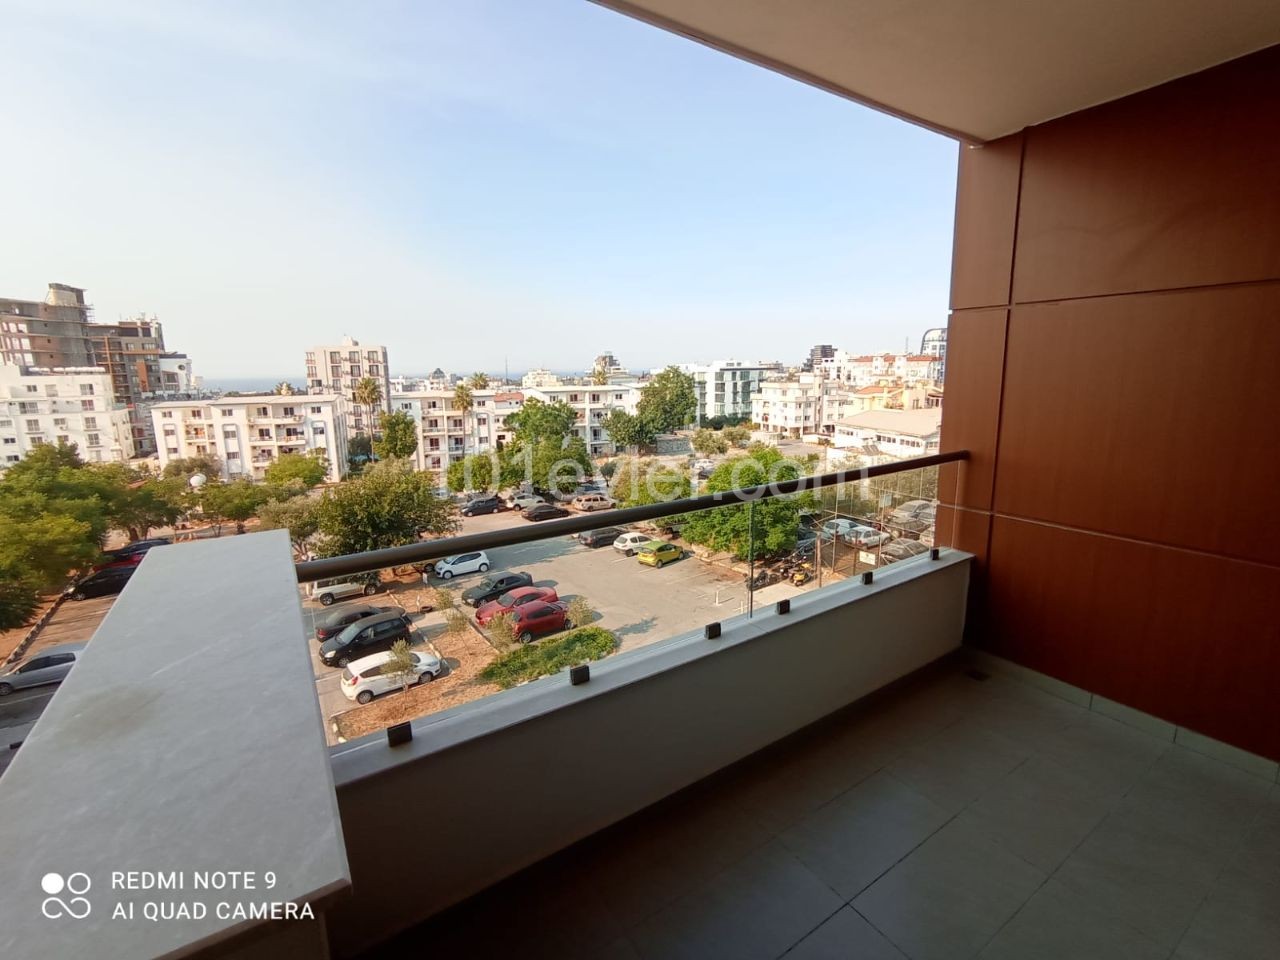 3+1 FULLY FURNISHED LUXURY APARTMENT IN KYRENIA EMTAN CONCEPT! ** 